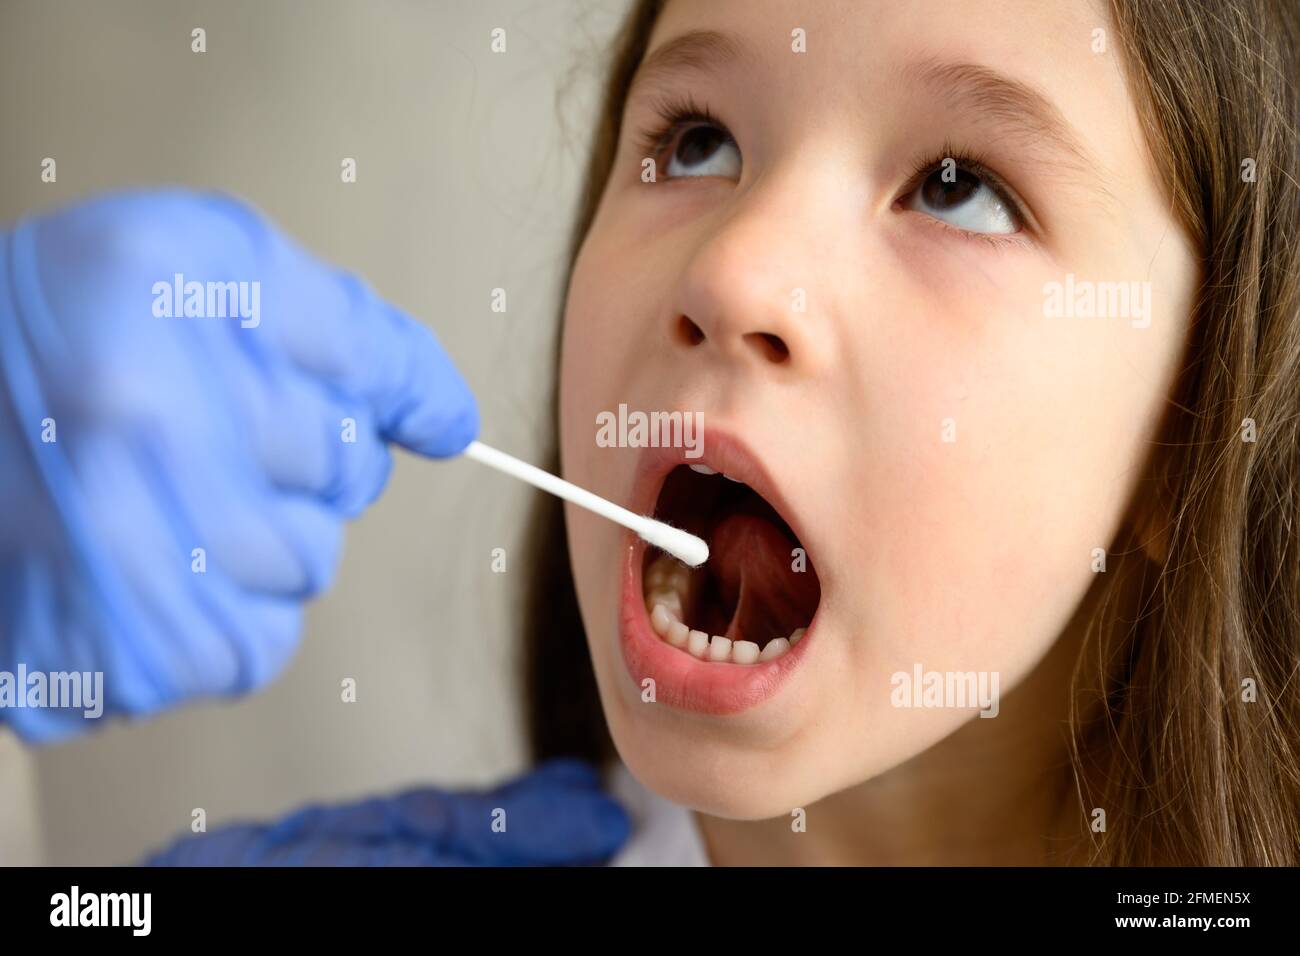 COVID-19 PCR test and kid face close-up, little girl opens mouth for coronavirus testing. Doctor or nurse holds swab for saliva sample from cute child Stock Photo